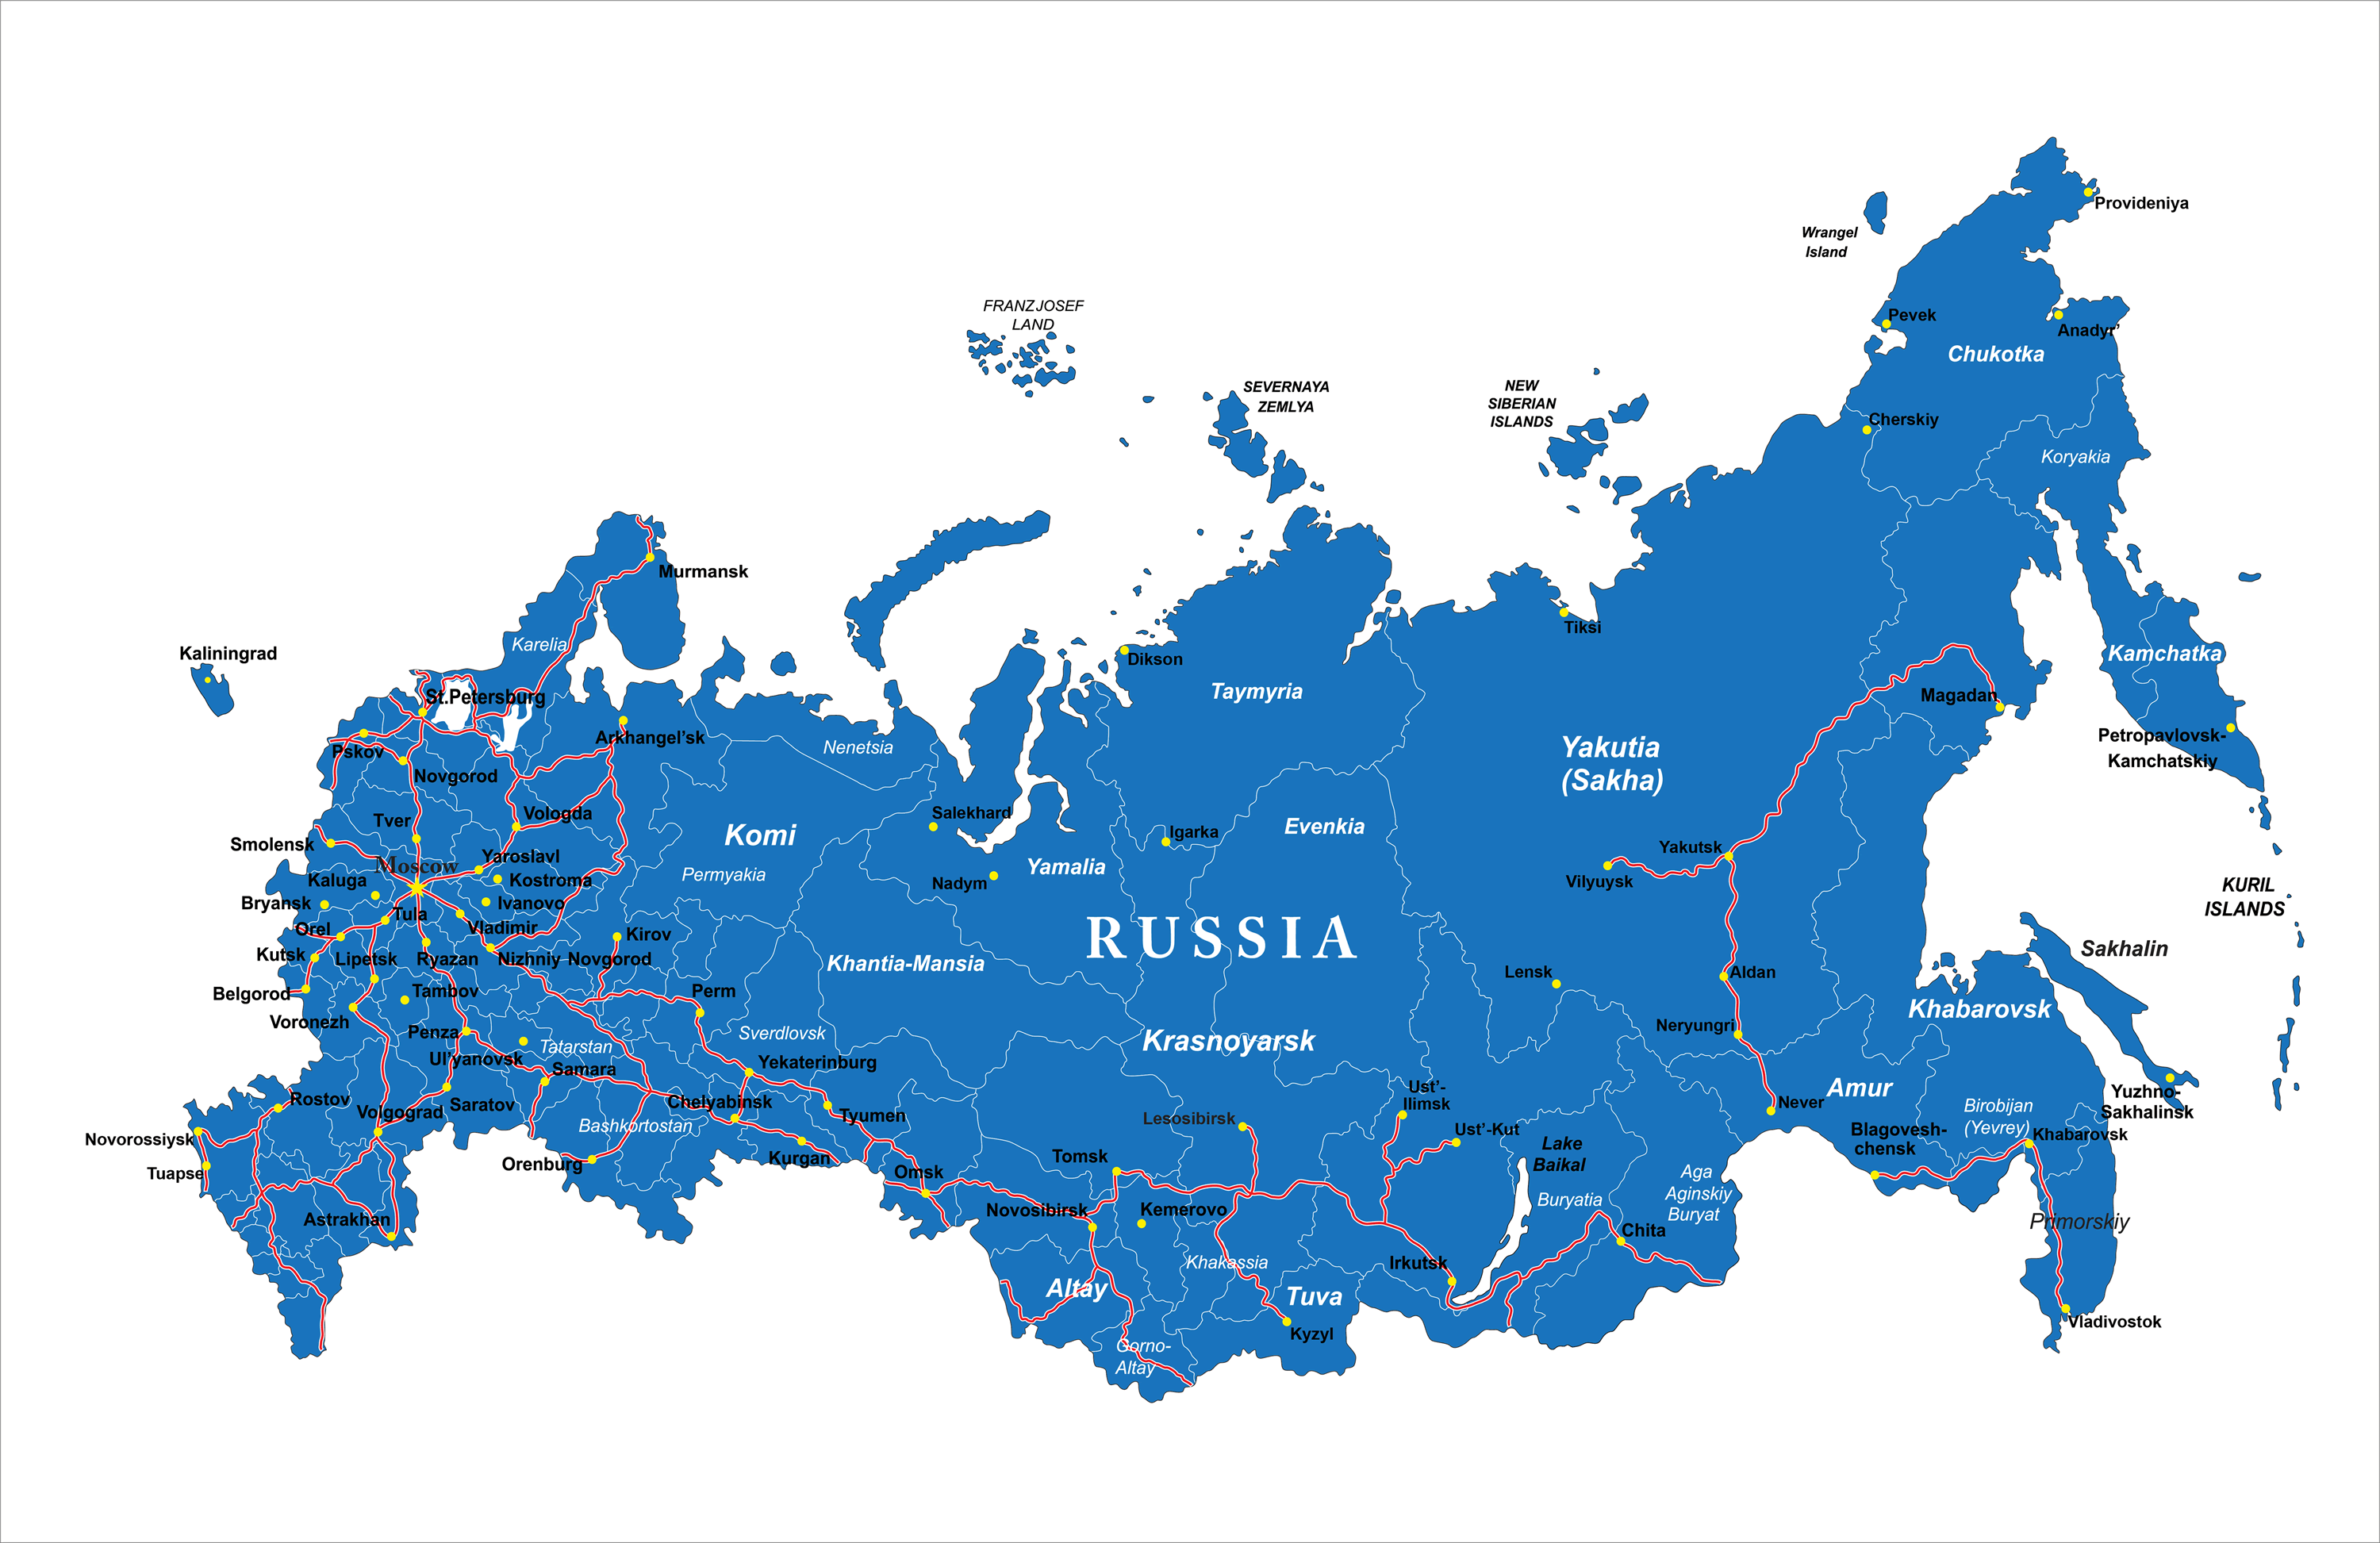 Russia Map - Guide of the World